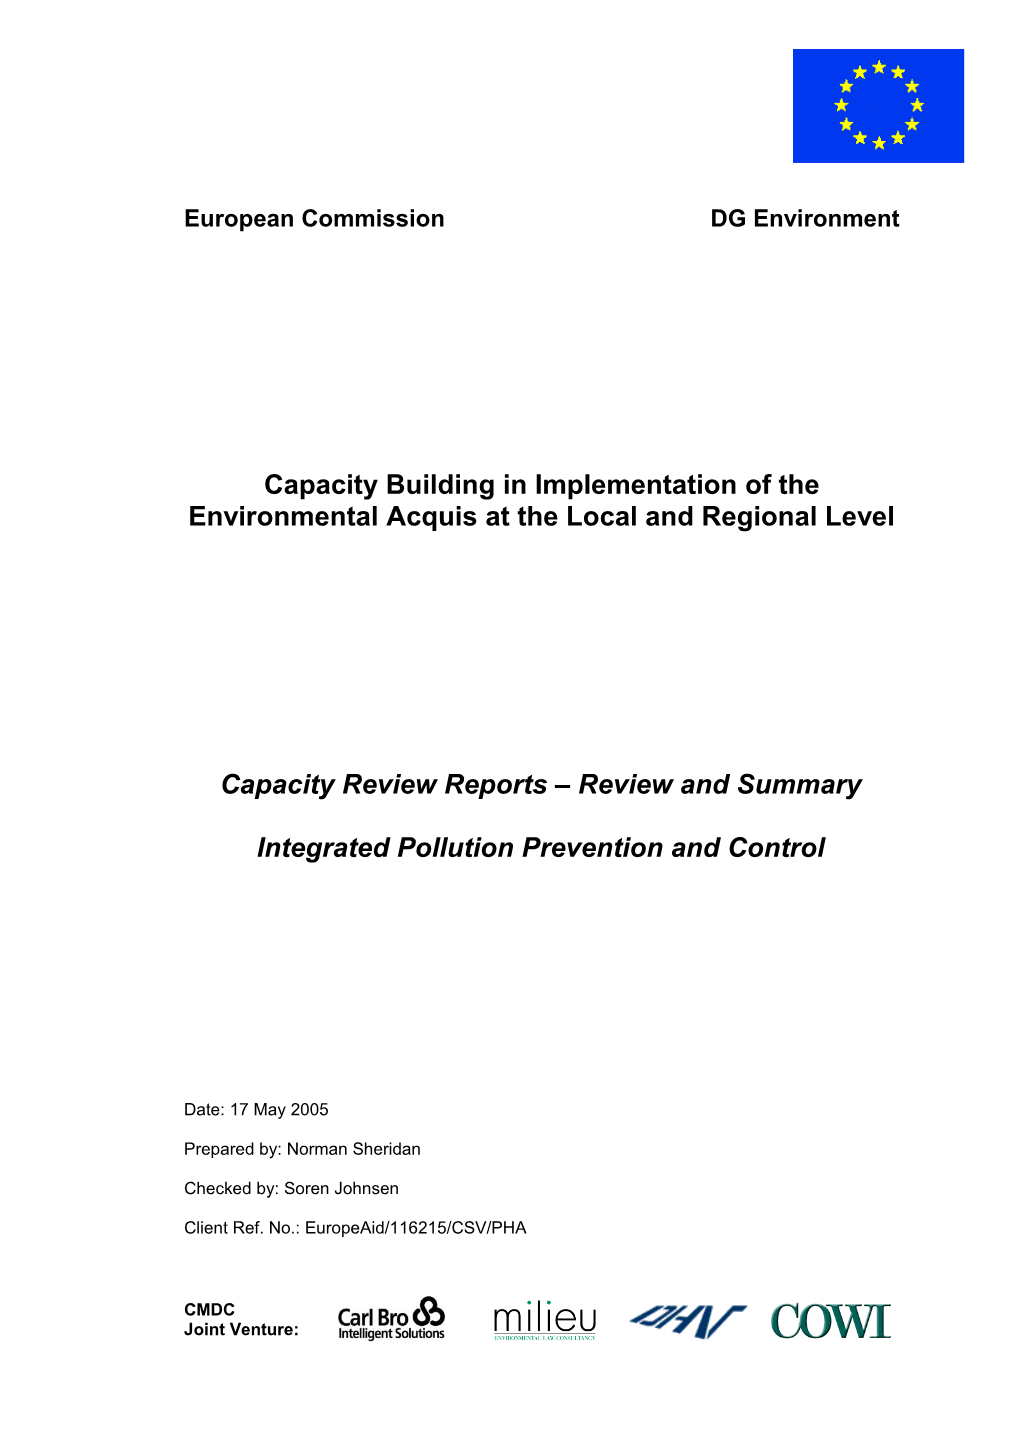 Capacitybuilding in Implementation of the Environmental Acquis at the Local and Regional Level